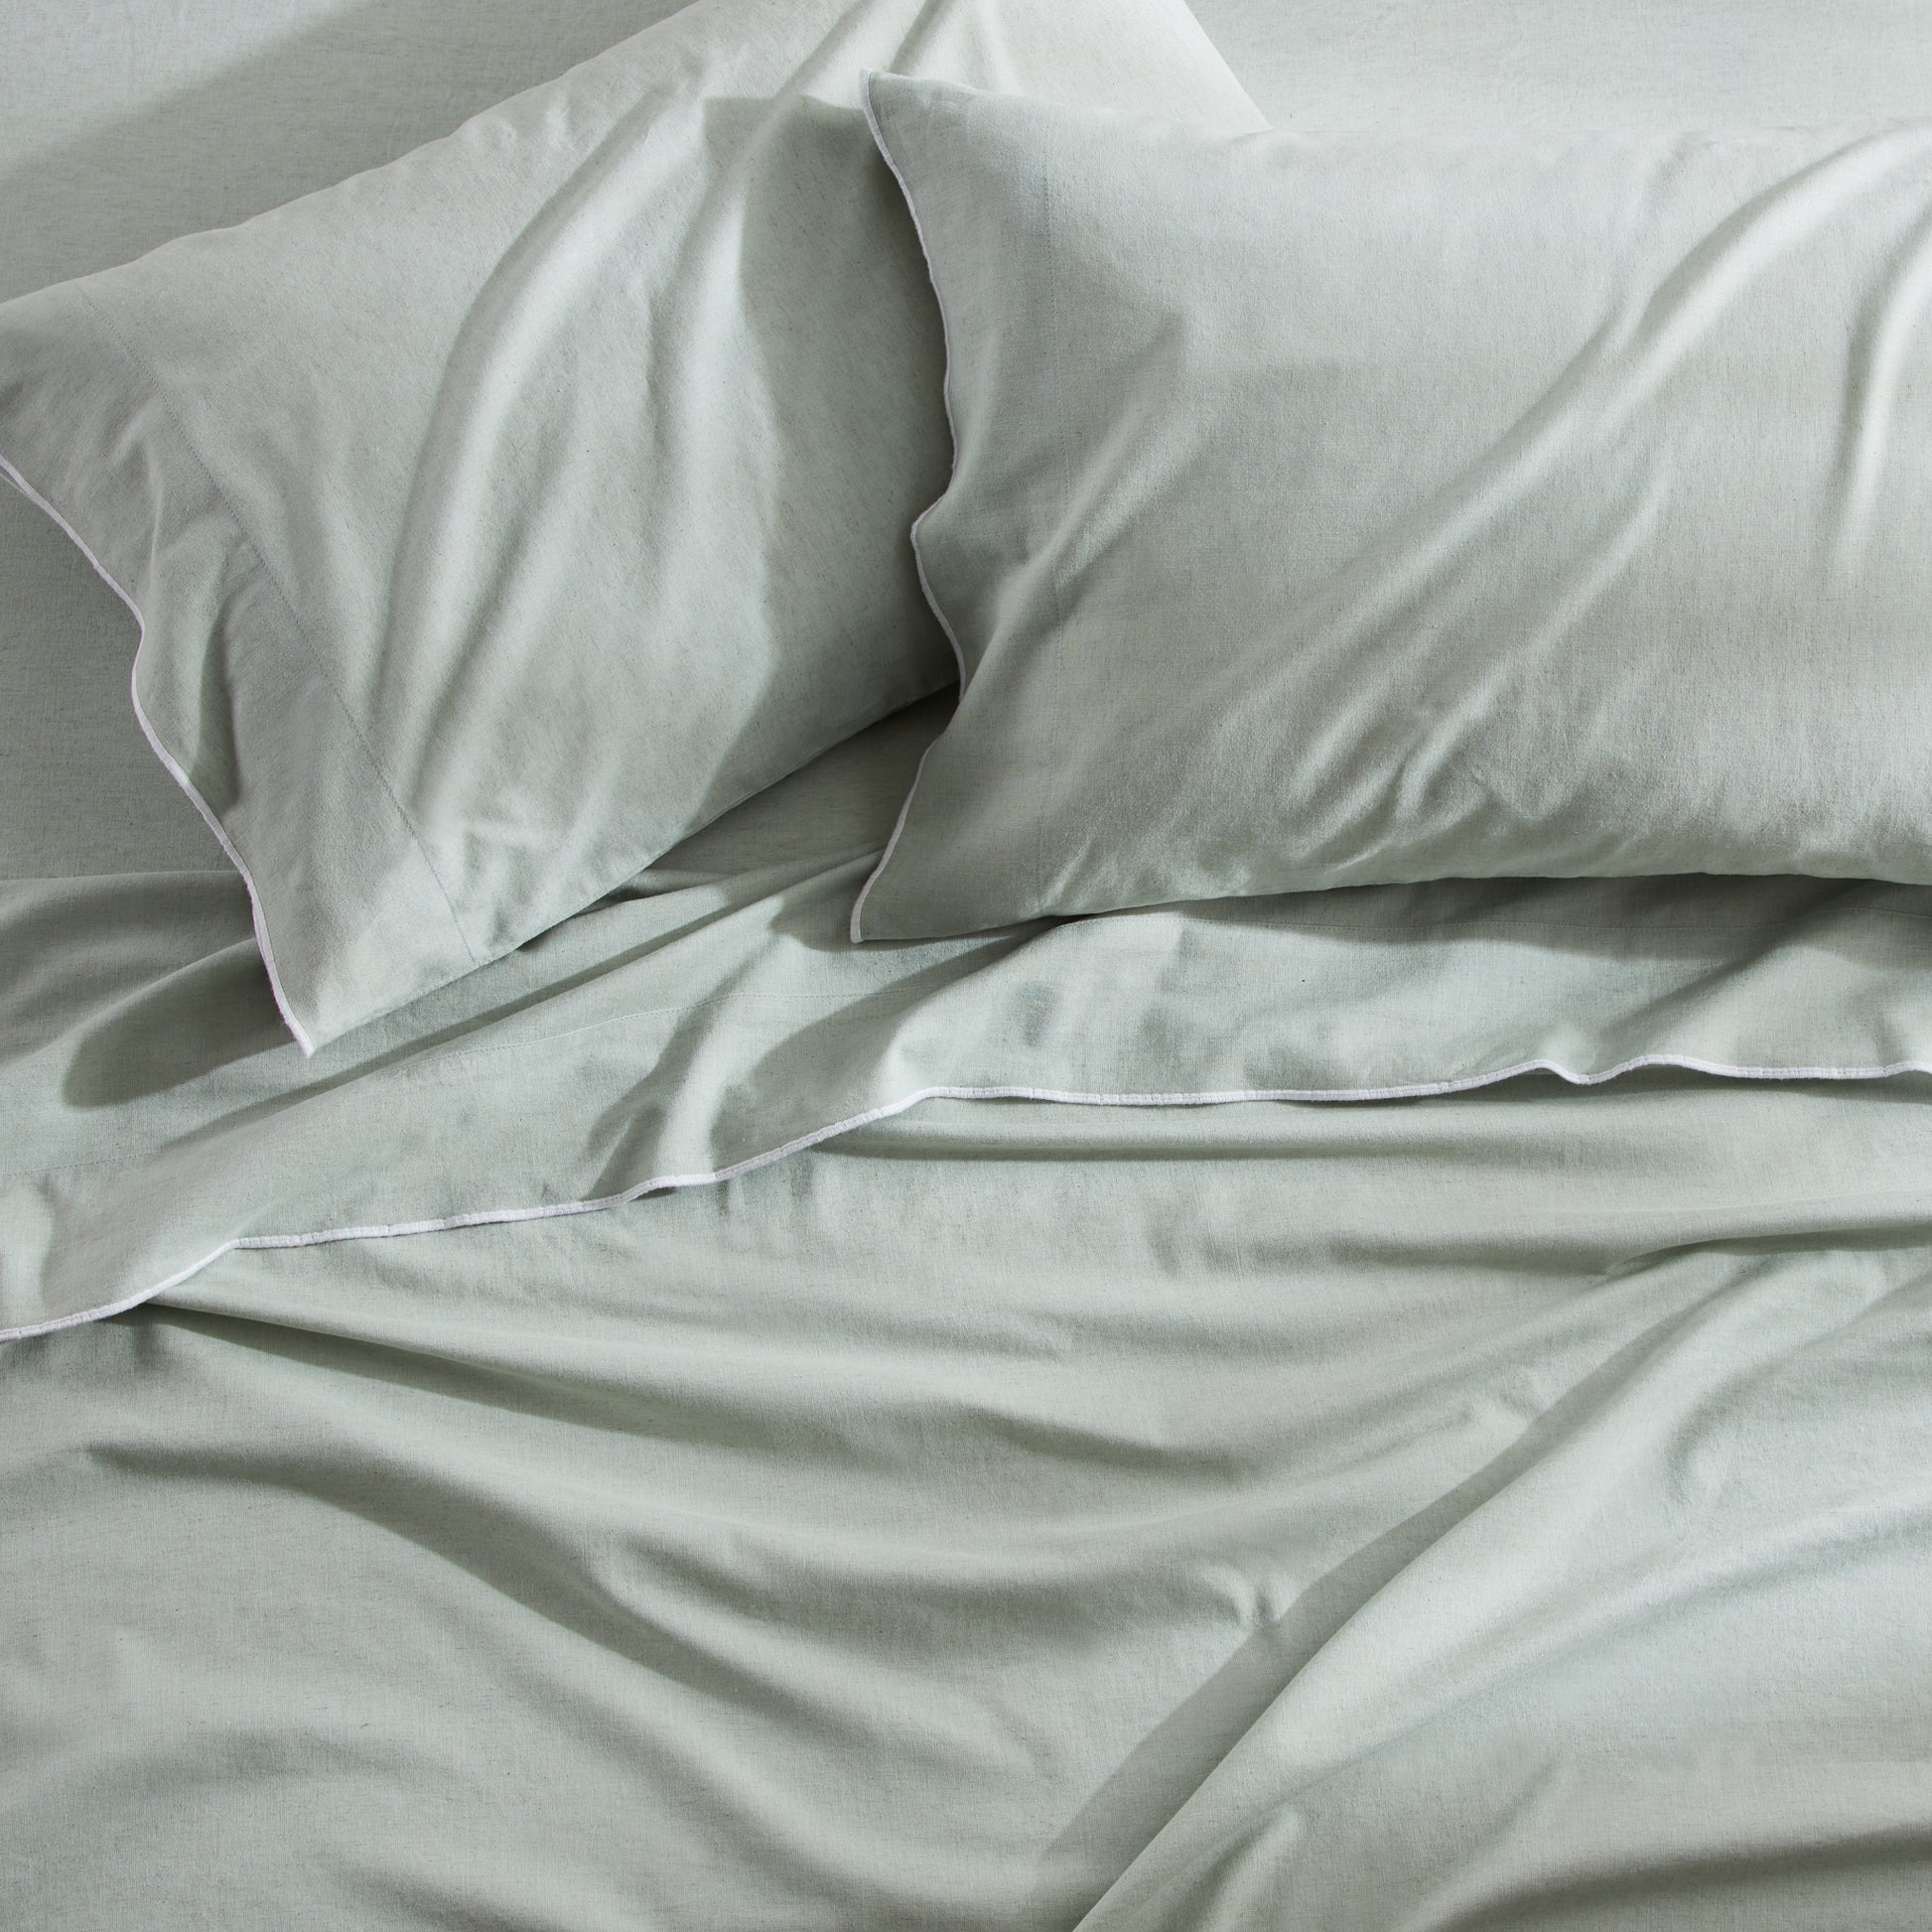 The Danjor Linens Soft Bed Sheets Are Just $30 on